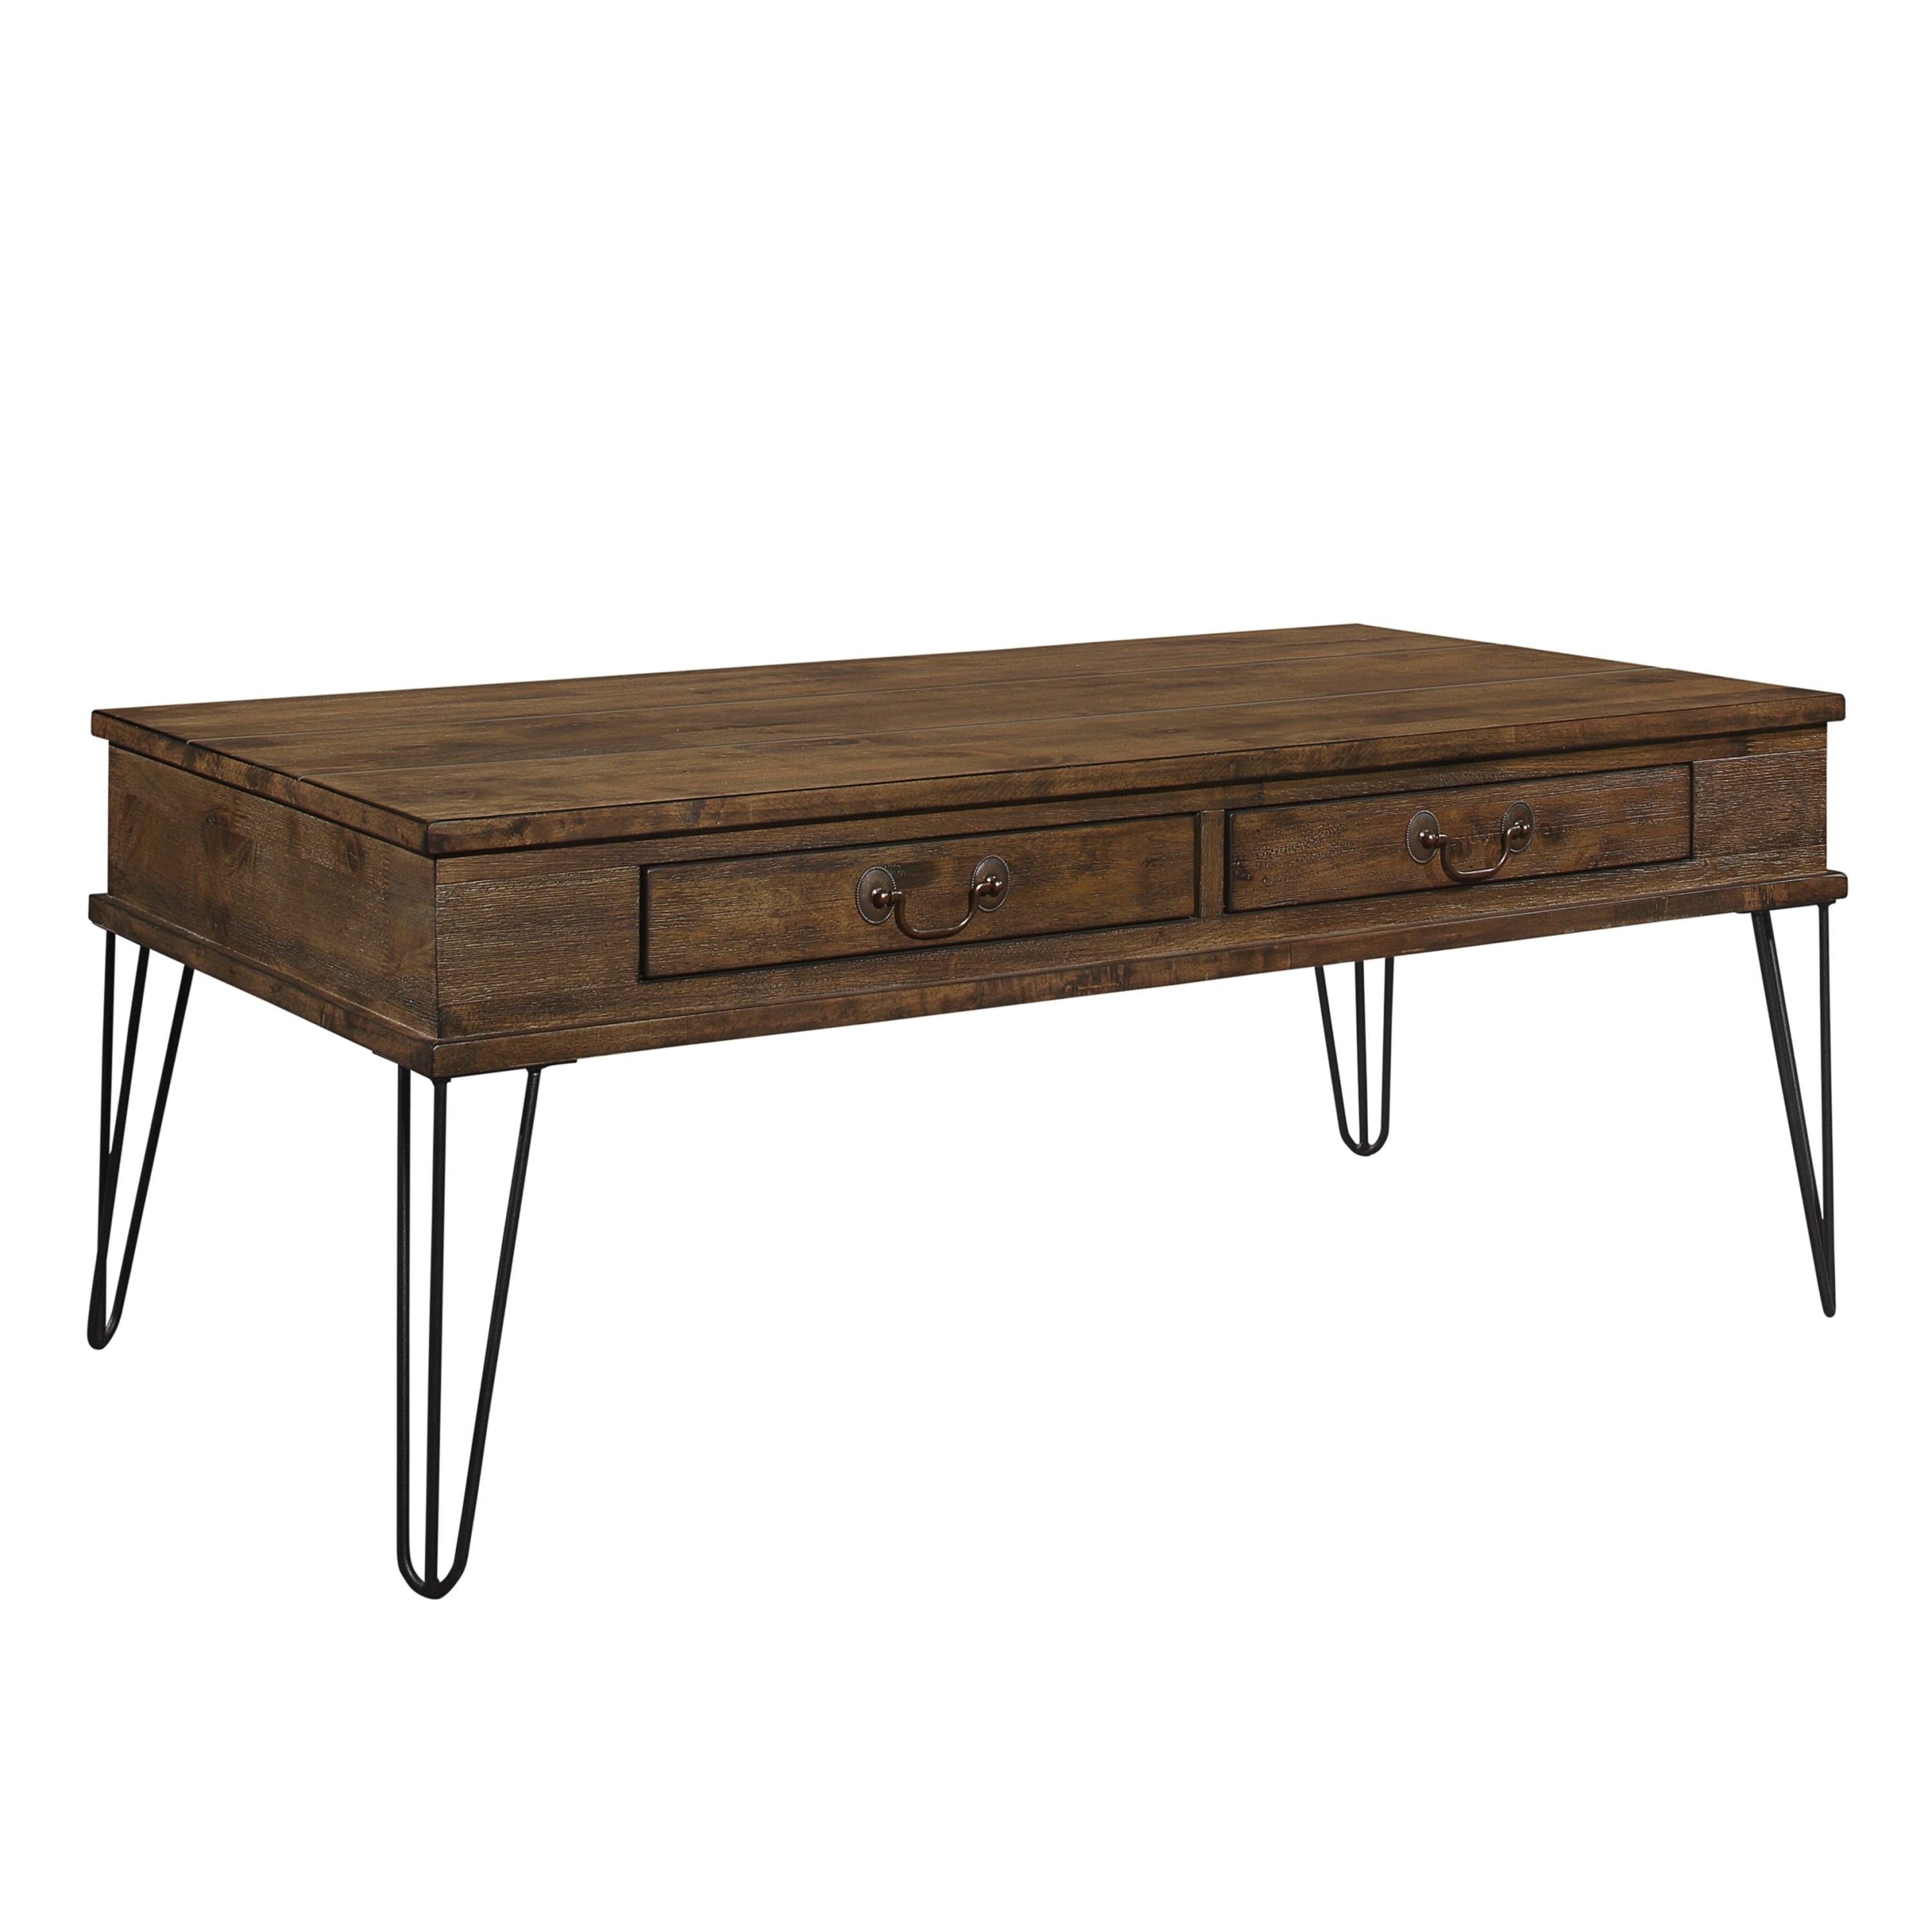 Rustic Oak and Black Finish Classic Rectangular Cocktail Table with 2 Drawers Metal Legs